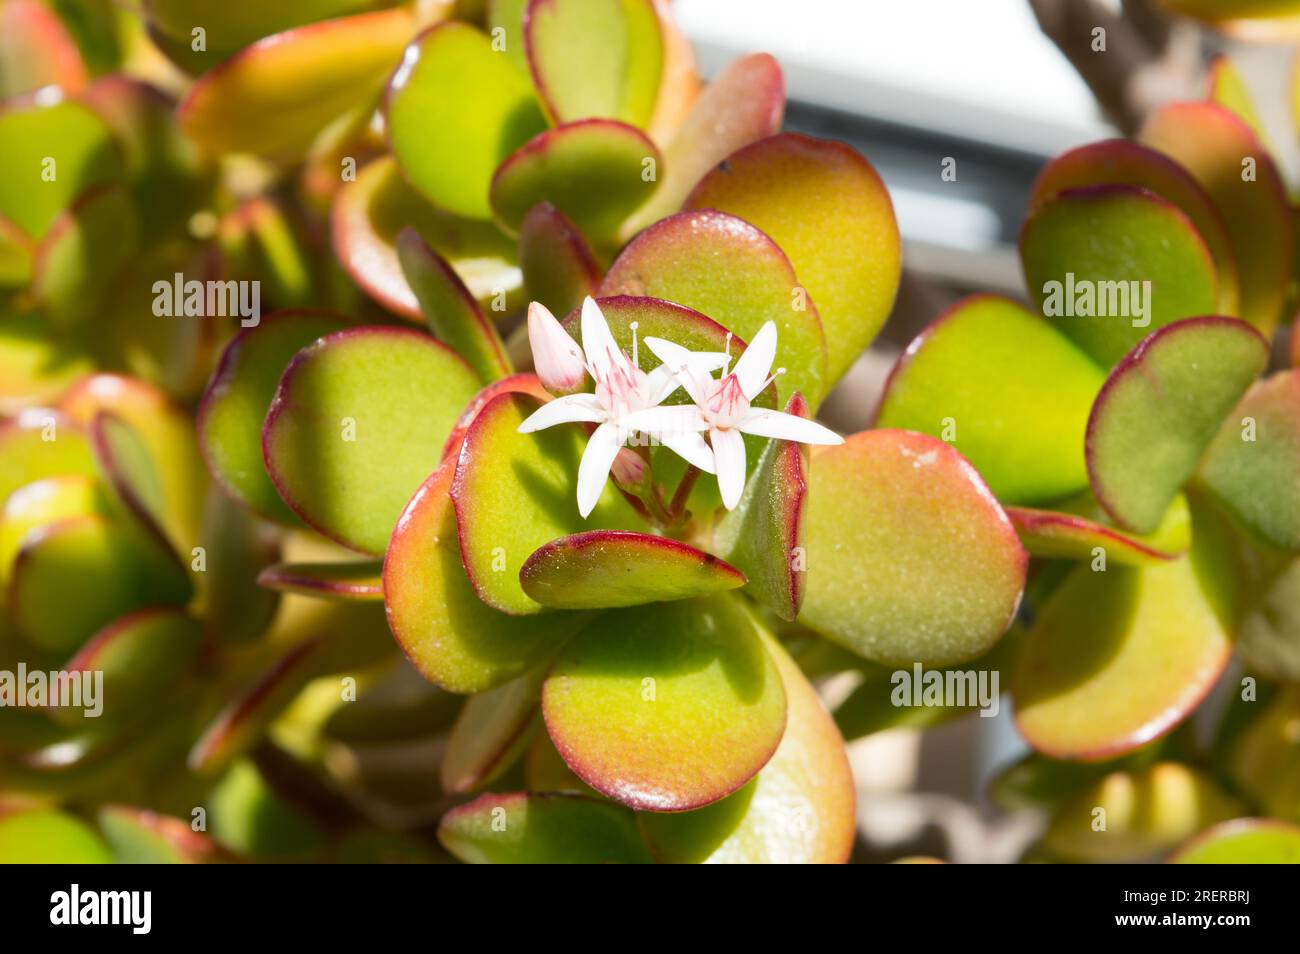 Crassula ovata plant, jade or money plant, with small white flowers and jade green leaves with red border, close up Stock Photo